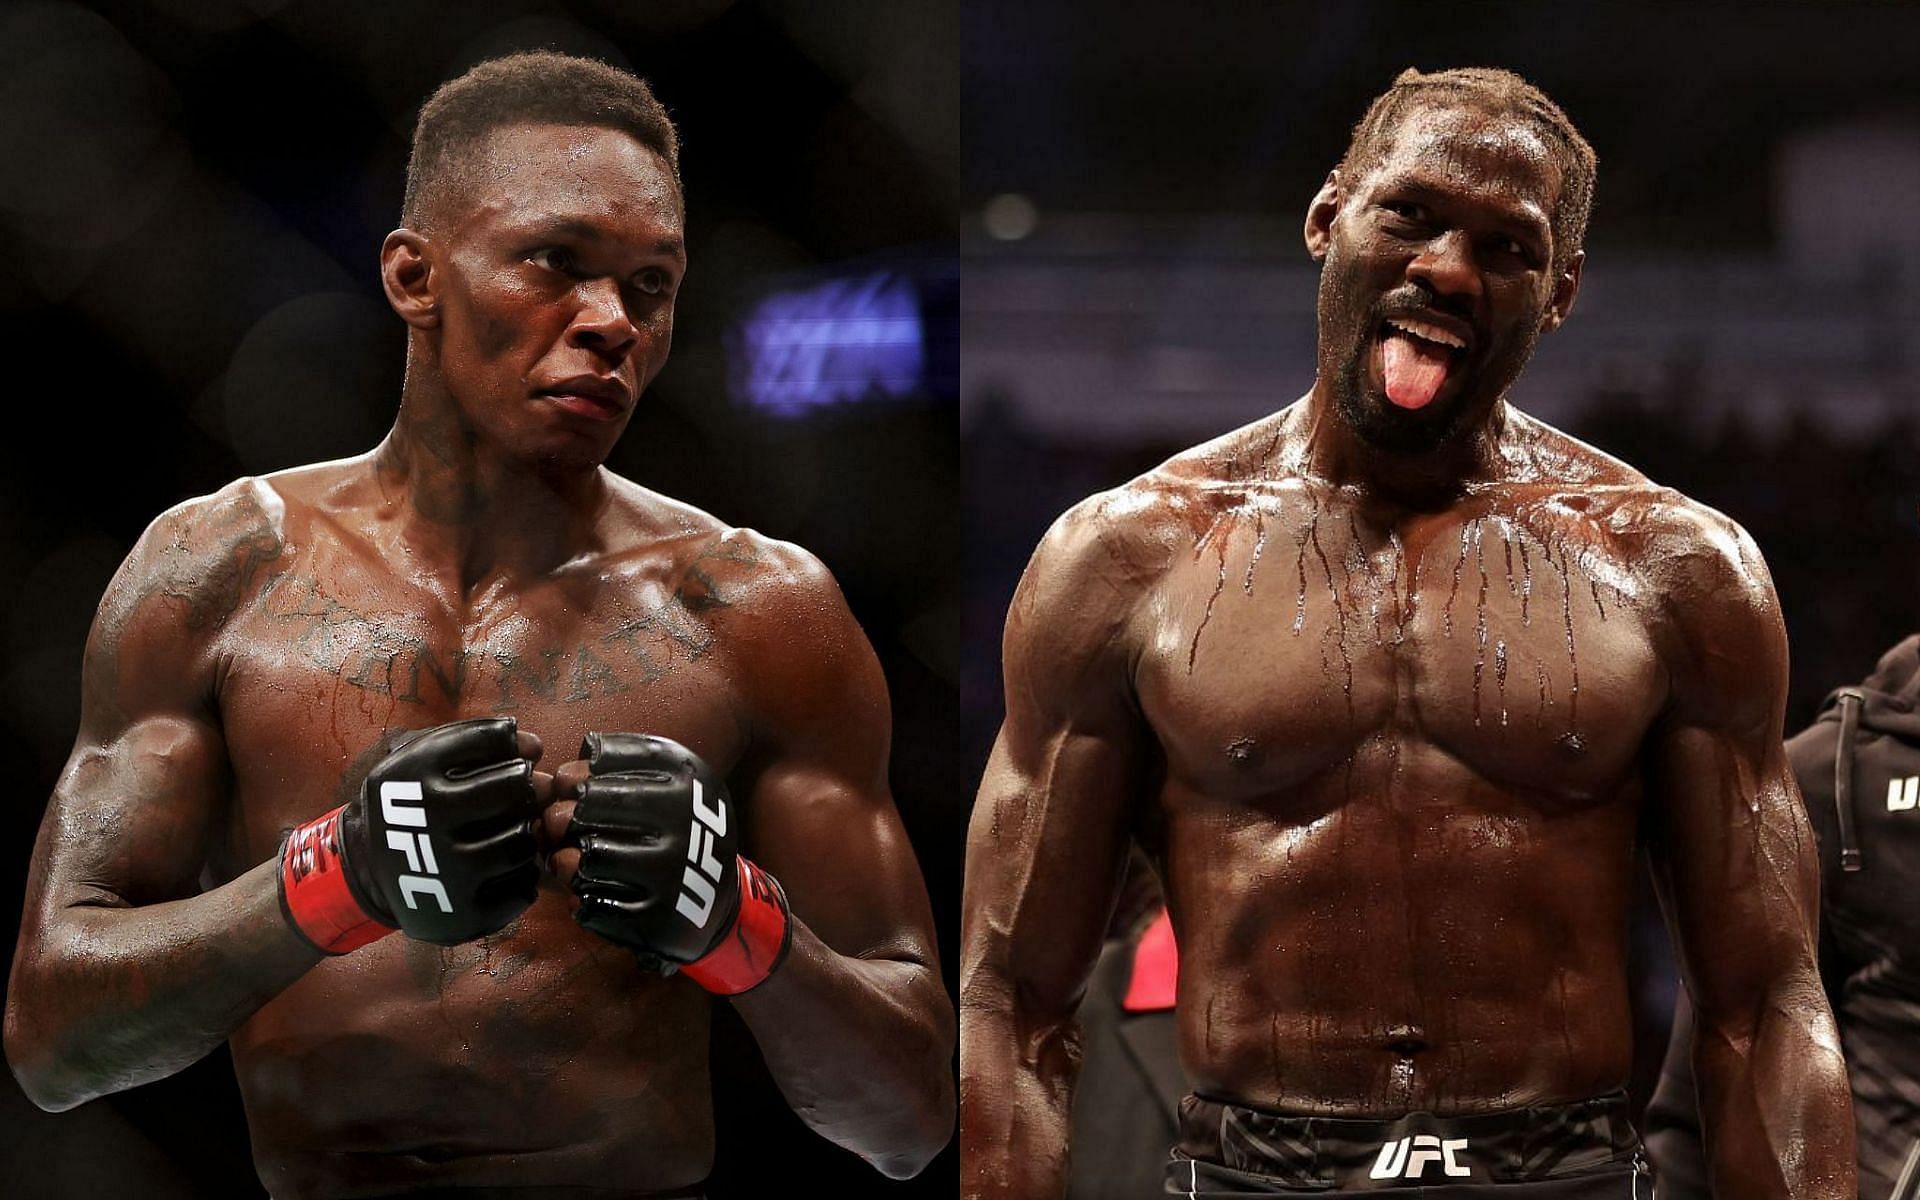 Israel Adesanya and Jared Cannonier are set to square off at UFC 276